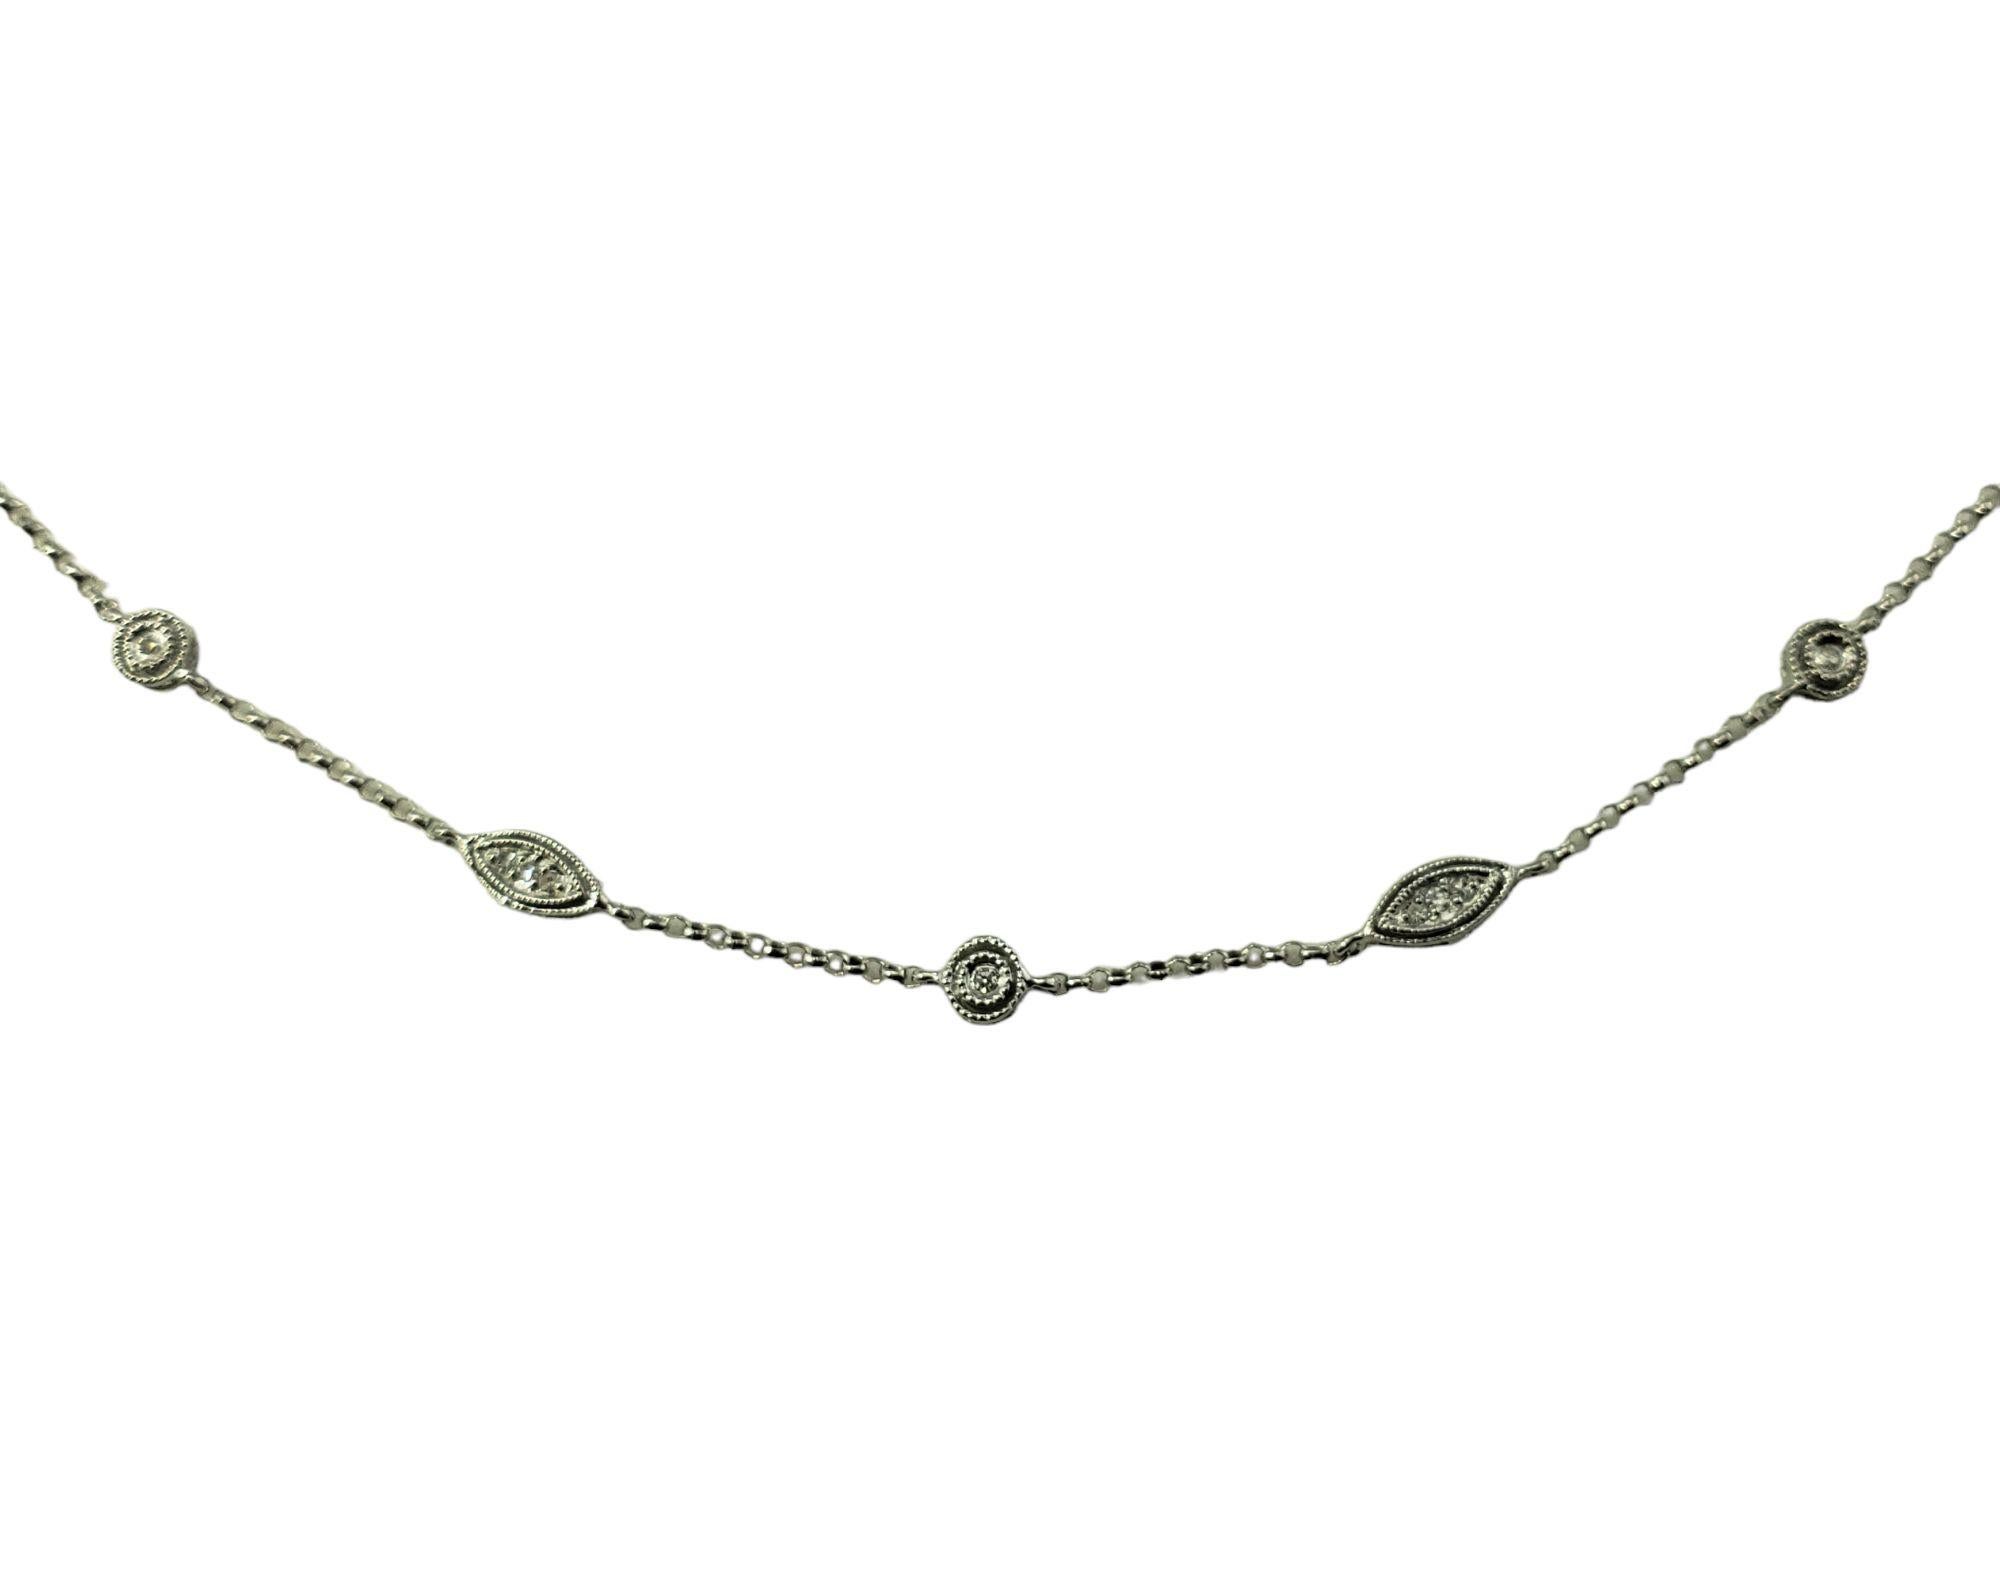 Vintage 14 Karat White Gold Diamond Station Necklace-

This lovely station necklace features 62 round single cut diamonds set in beautifully detailed 14K white gold.

Approximate total diamond weight: .50 ct.

Diamond clarity: SI2-I

Diamond color: